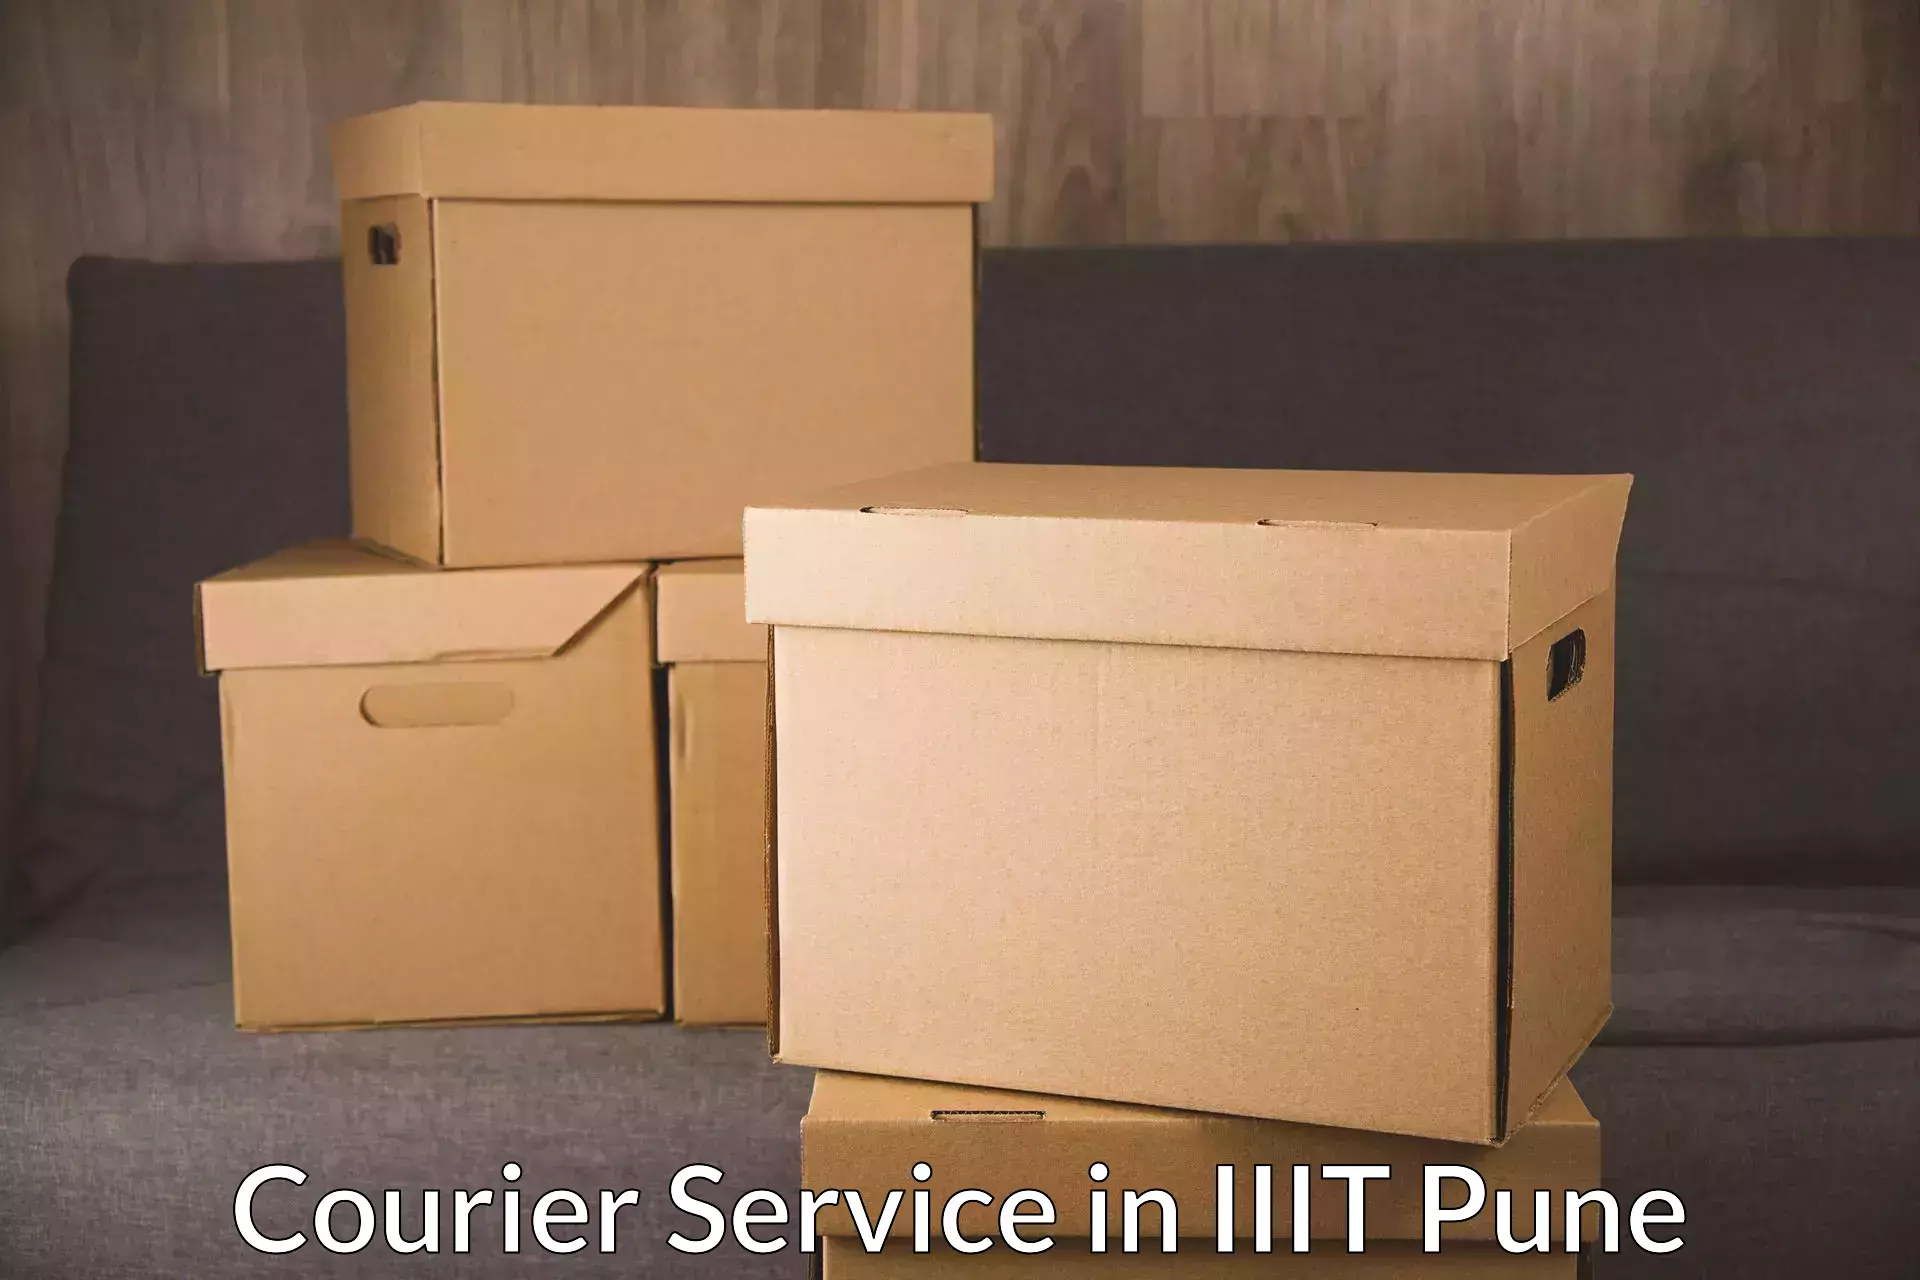 Courier service comparison in IIIT Pune